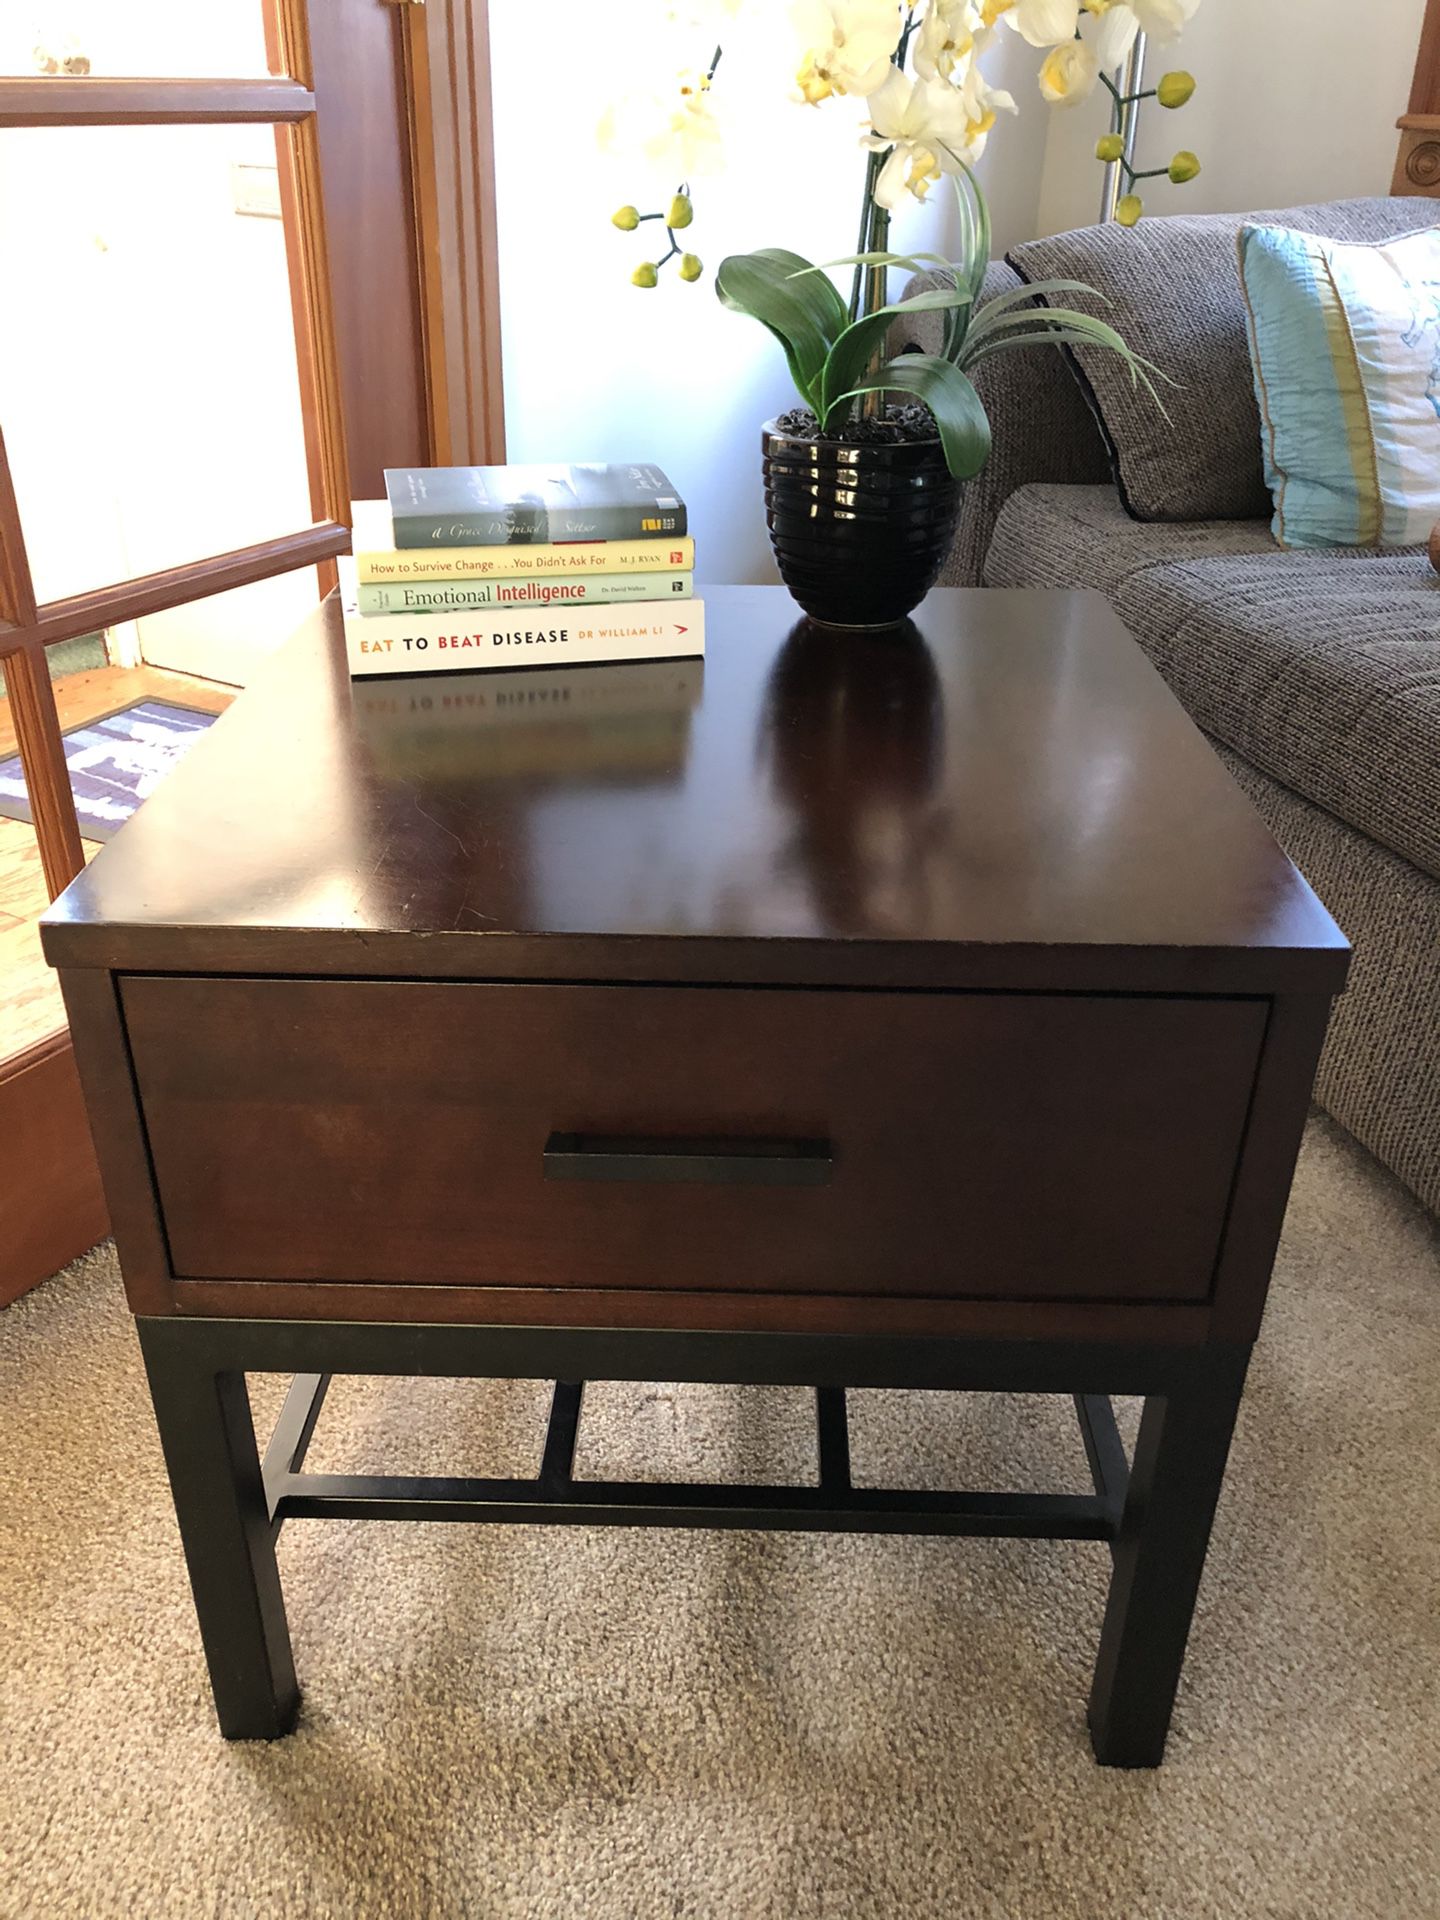 Two hardwood end tables, dark stain. Good shape and great drawers for storing things! Also a nice metal framework for storing and appeal.